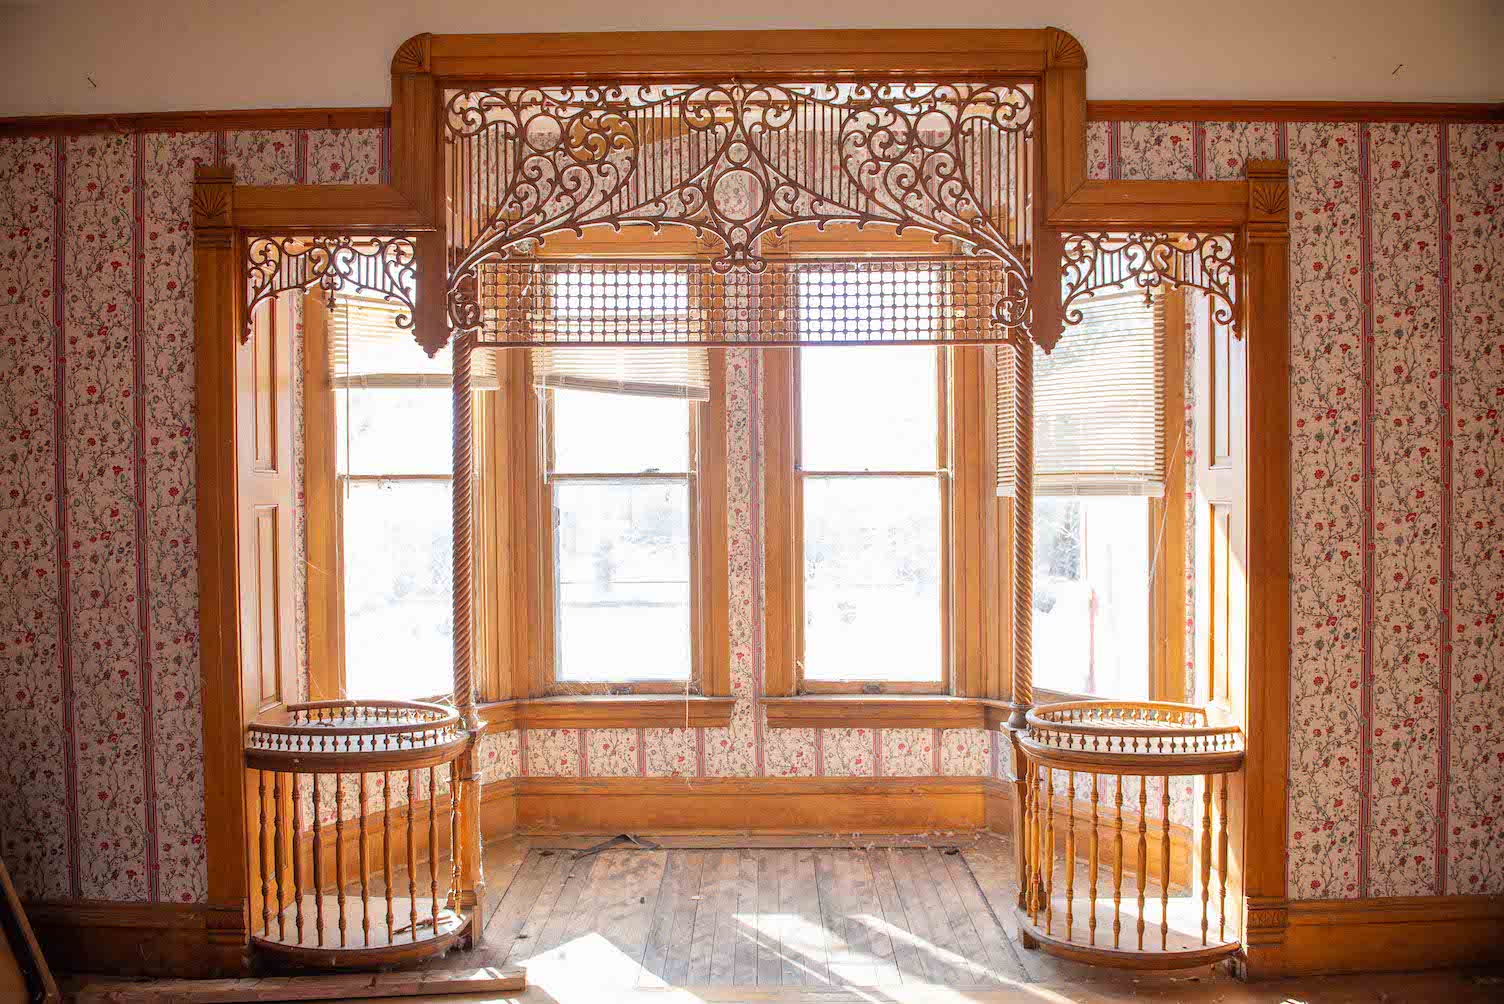 A large window with ornate handmade trim. Hartman Castle is a historic home in Gunnison, CO